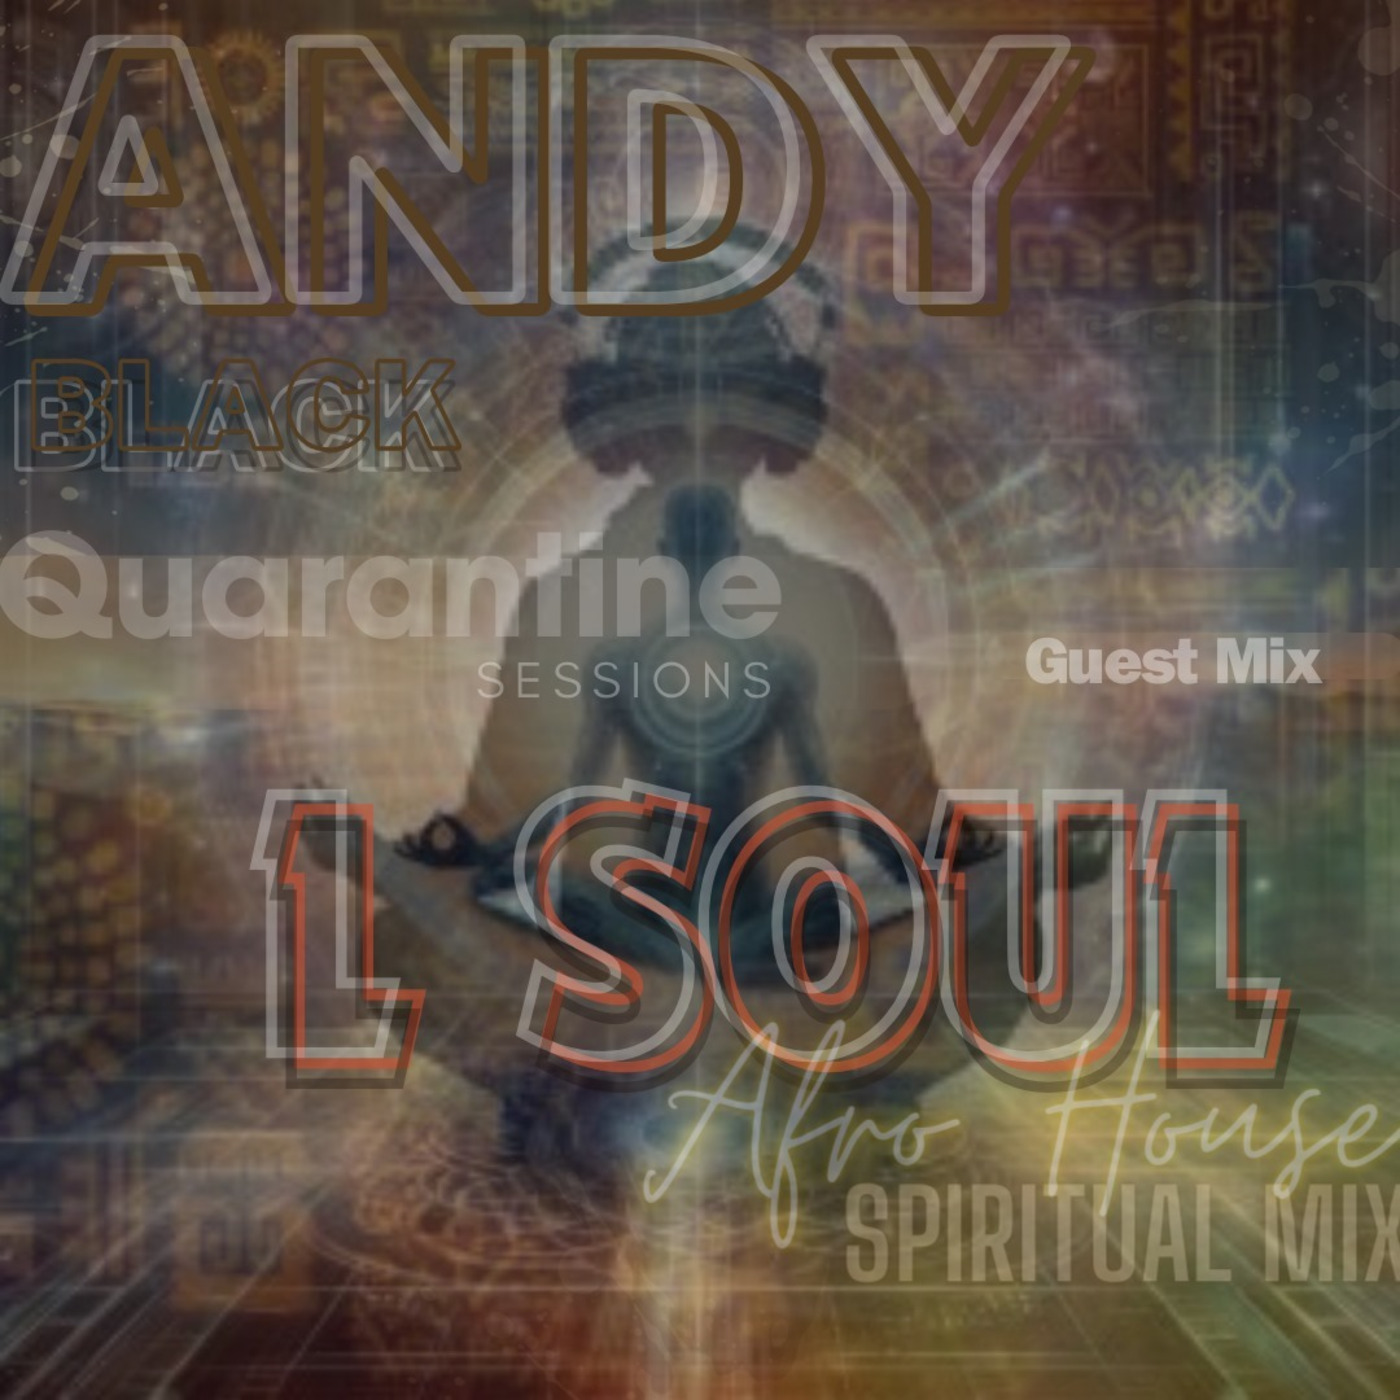 Andy Black - #QuarantineSessions - Afro House, Soulful Spiritual Mix (Guest Mix by L Soul) Episode 82